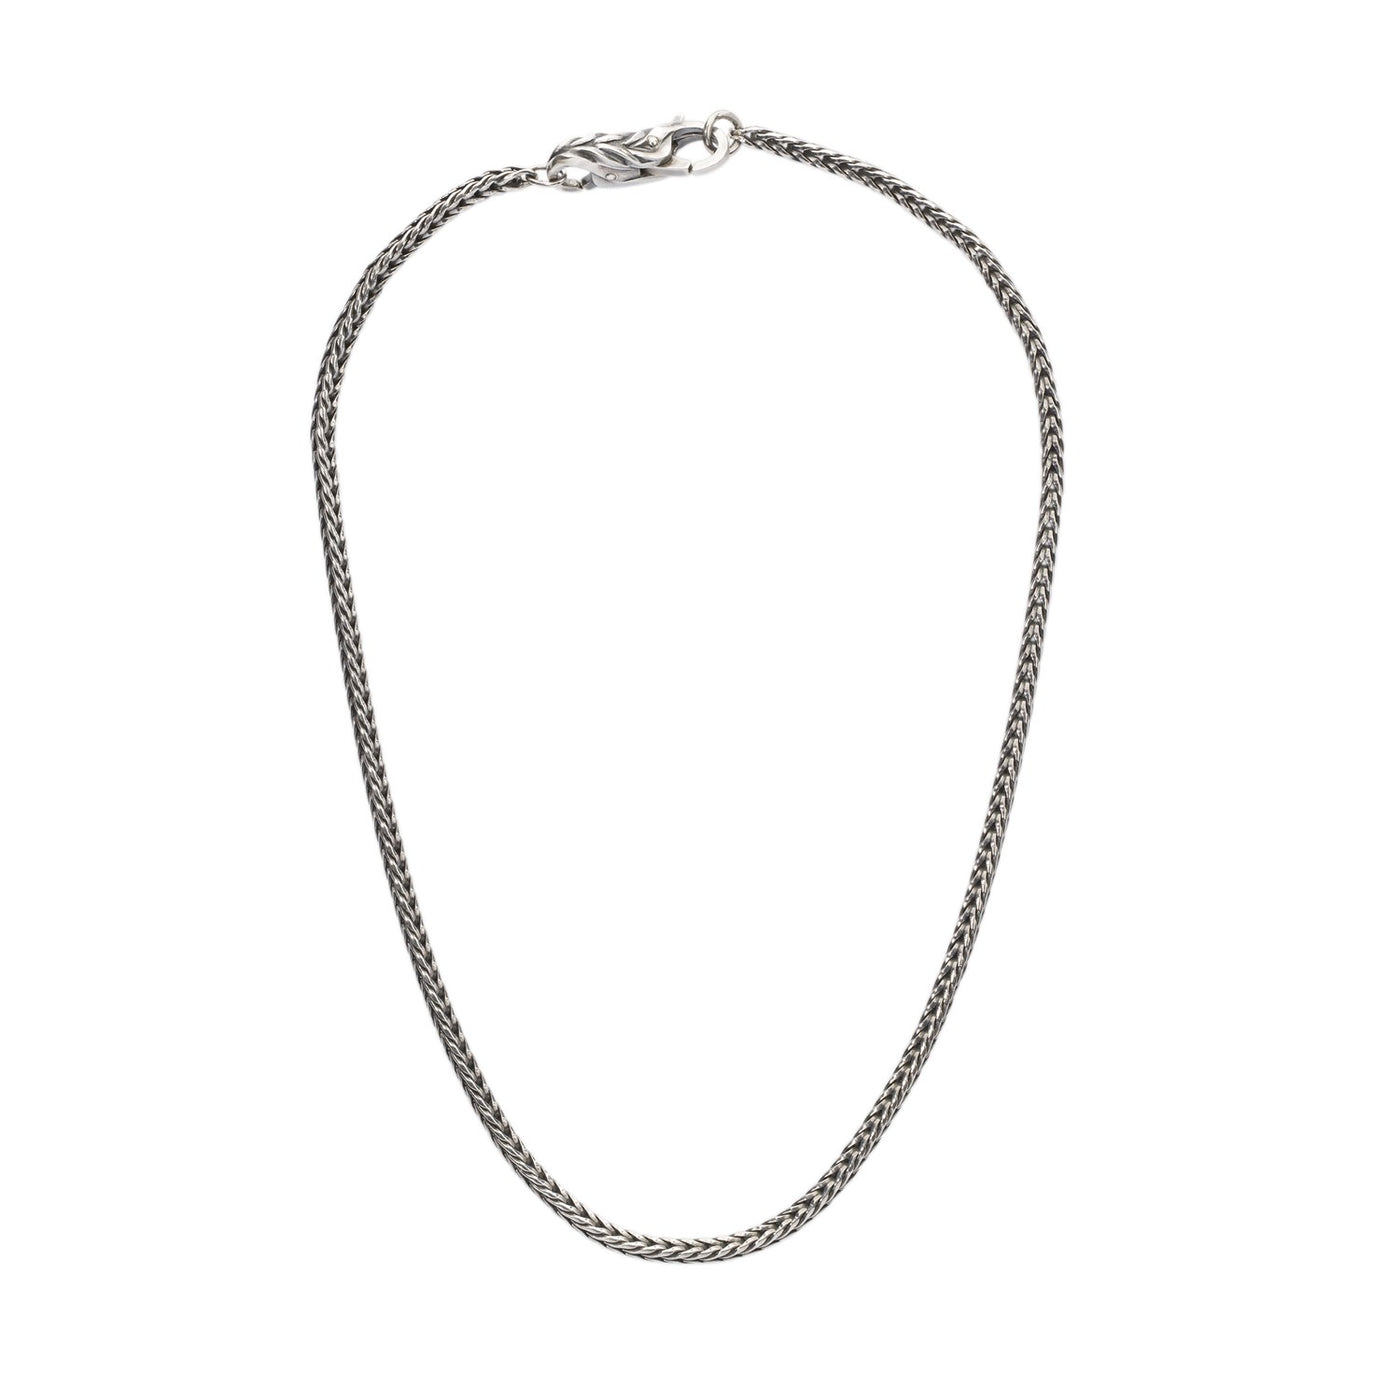 Classic sterling silver necklace, providing a versatile and timeless base for your Trollbeads pendant and beads.